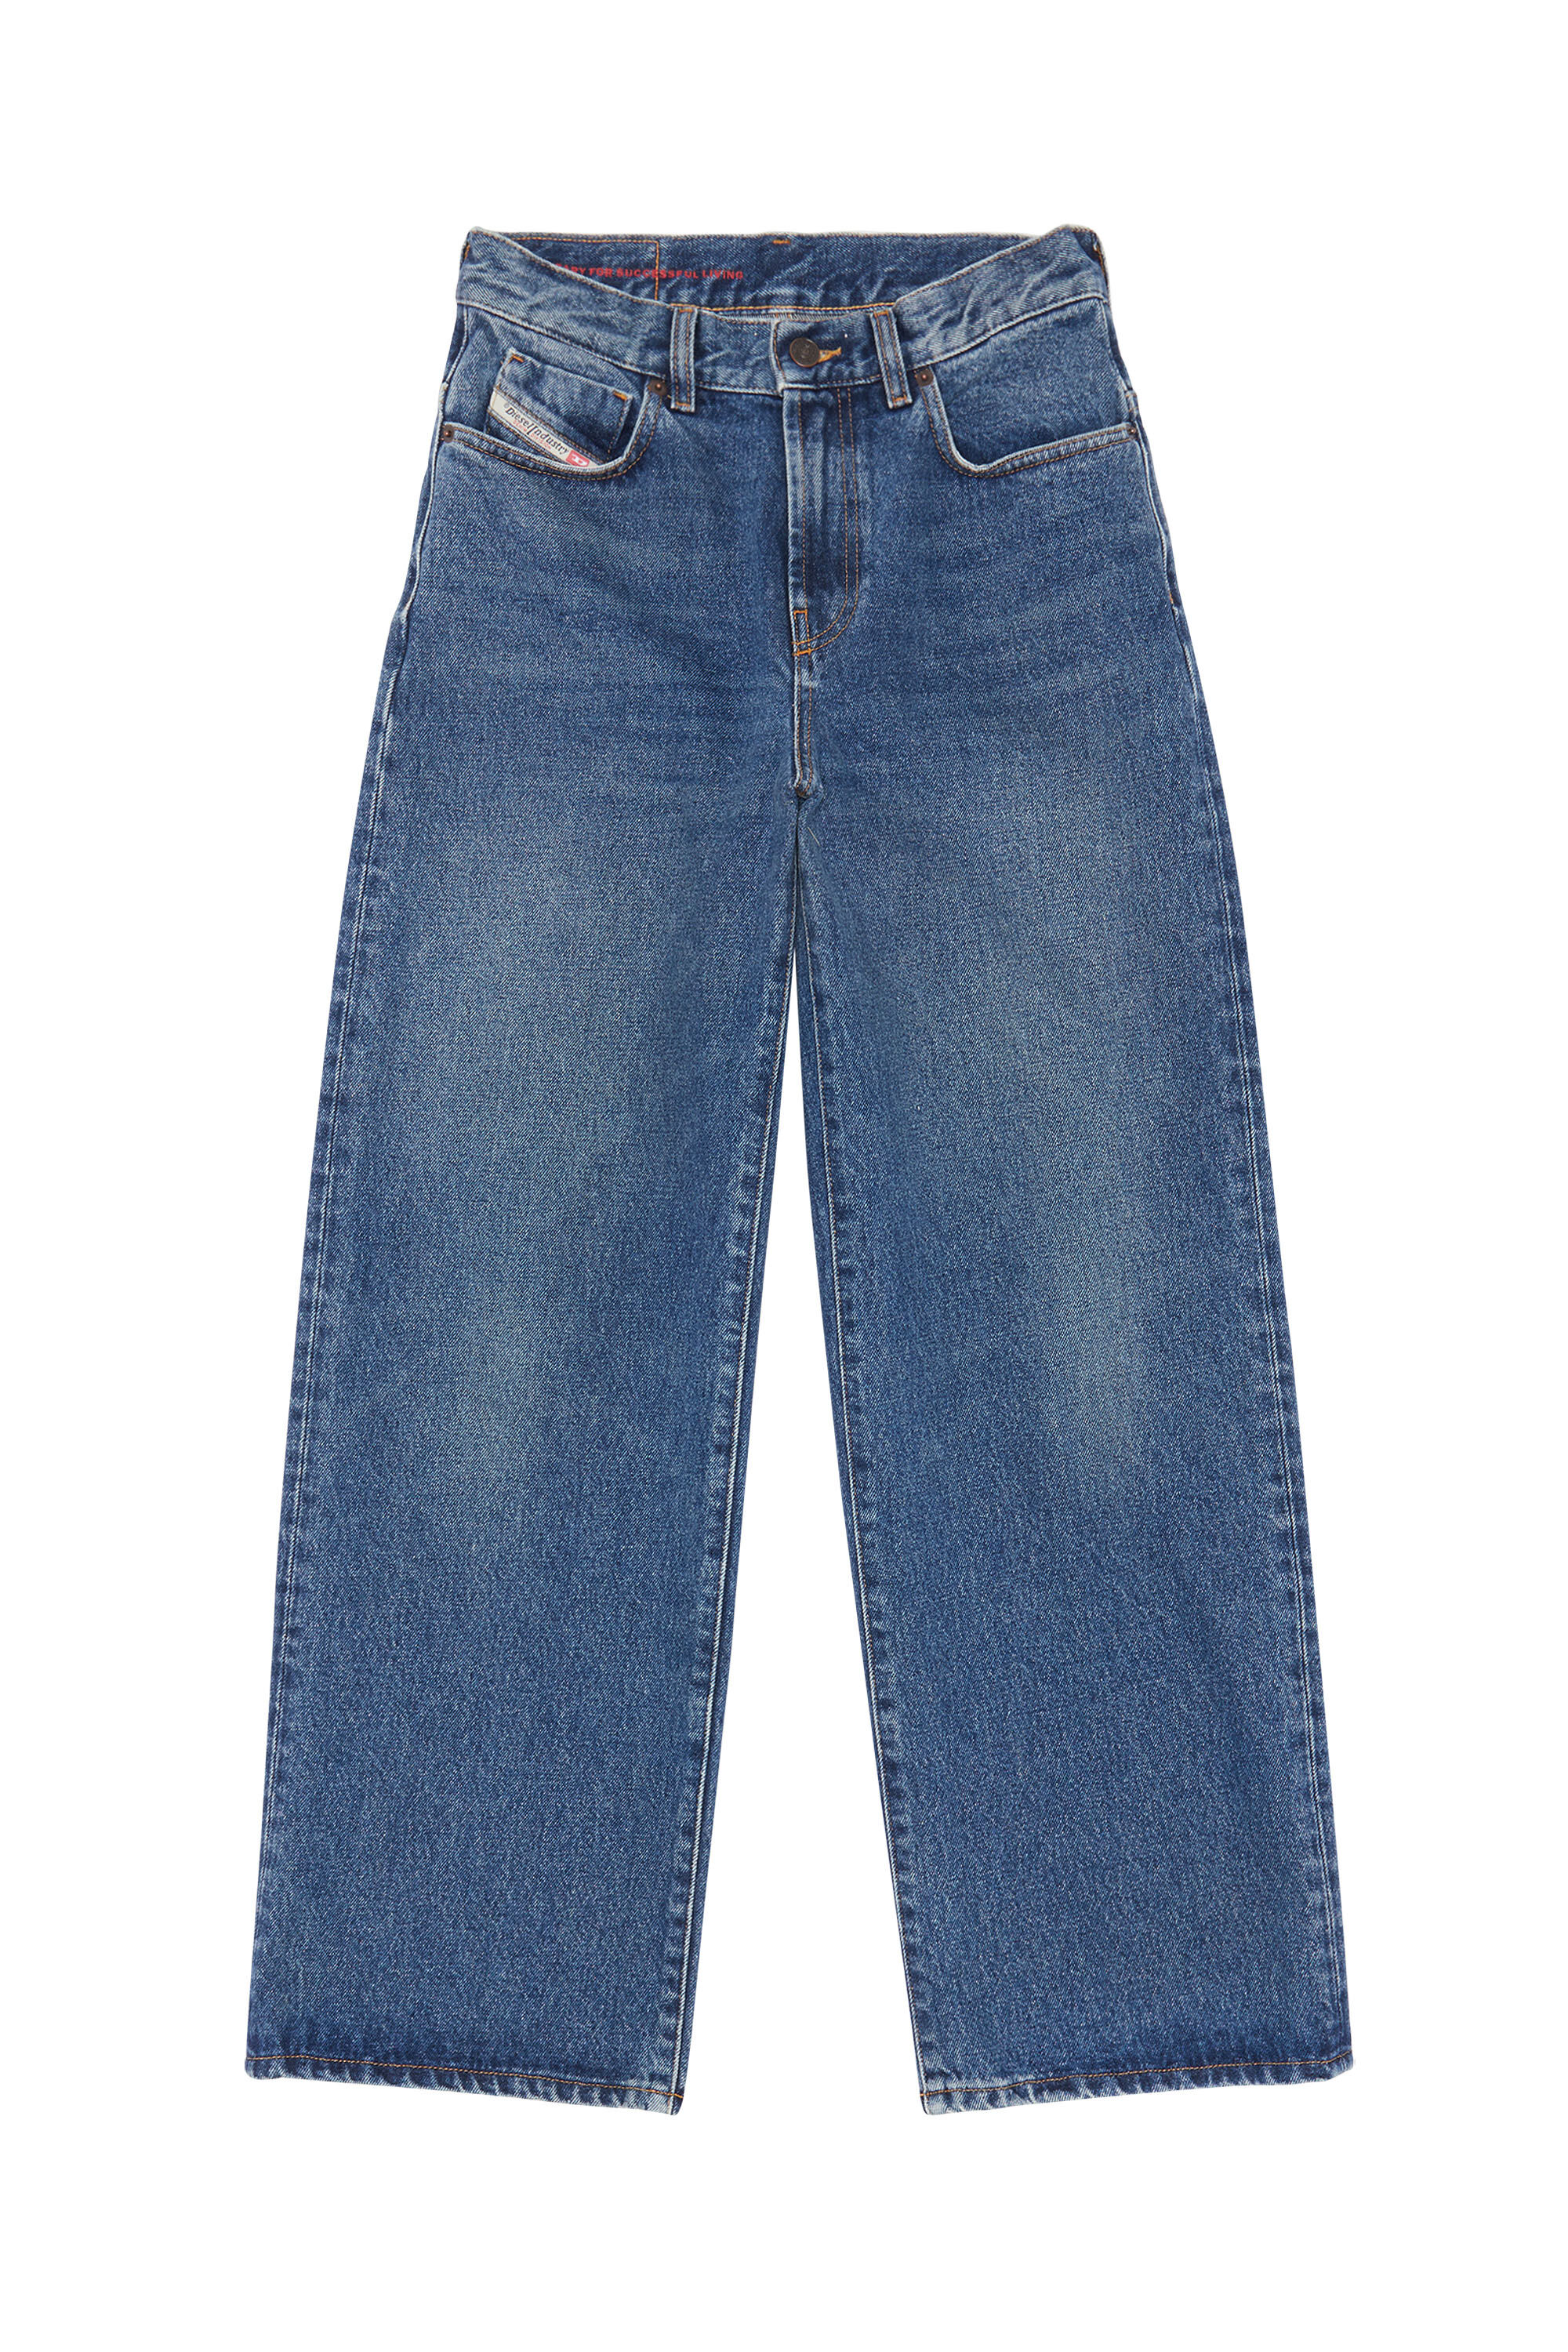 Diesel - 2000 Widee 007E5 Bootcut and Flare Jeans,  - Image 2